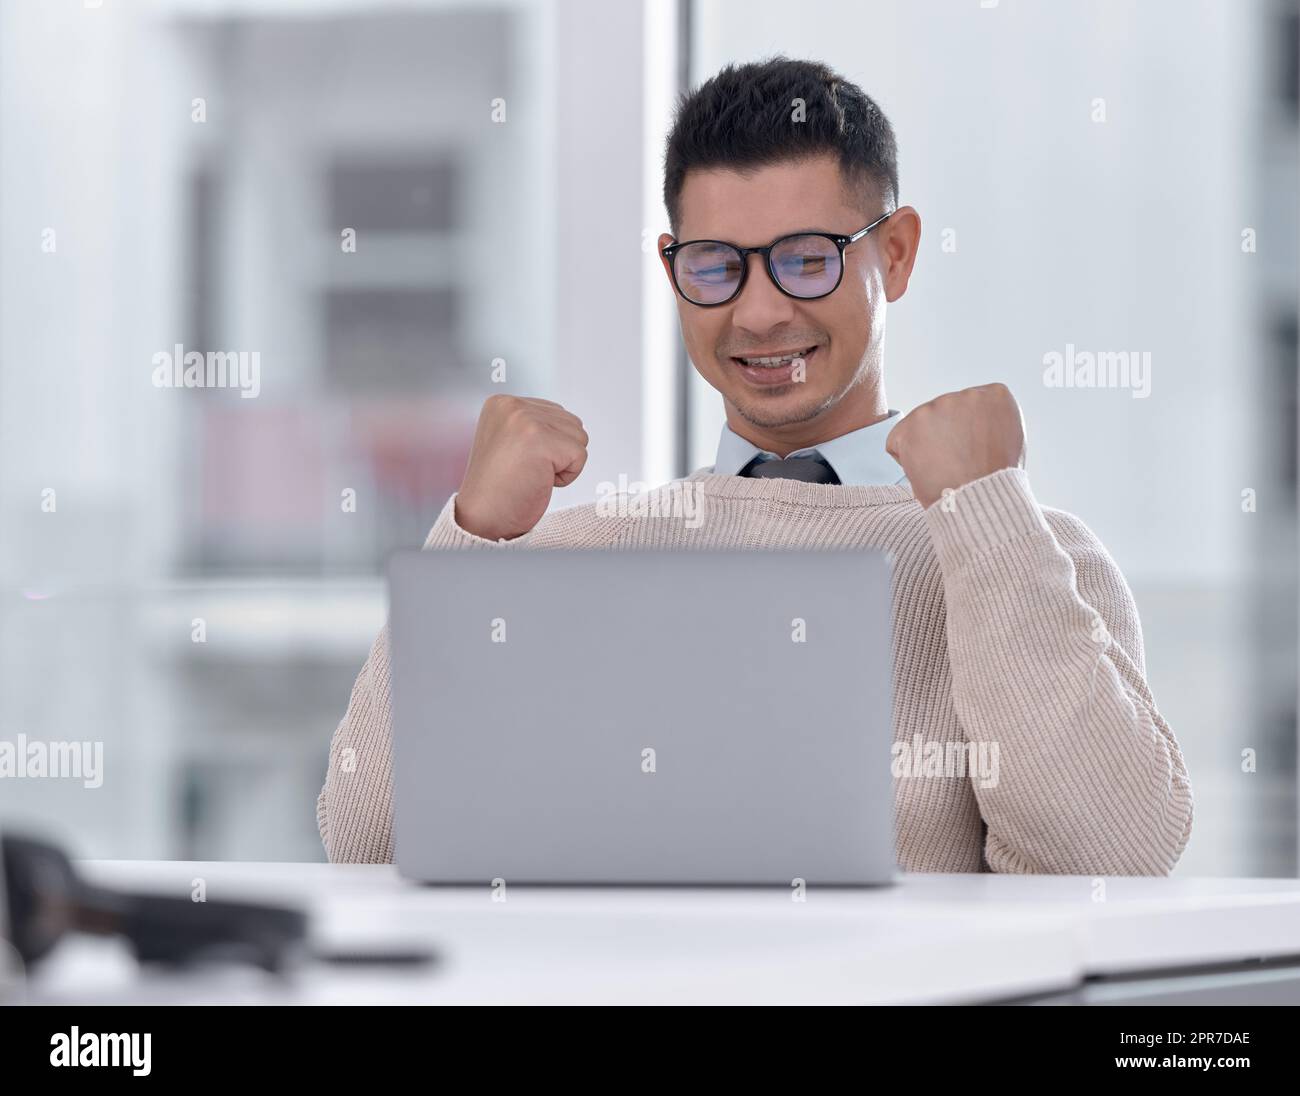 Hes just been presented with an amazing offer. a young businessman cheering while working on a laptop in an office. Stock Photo